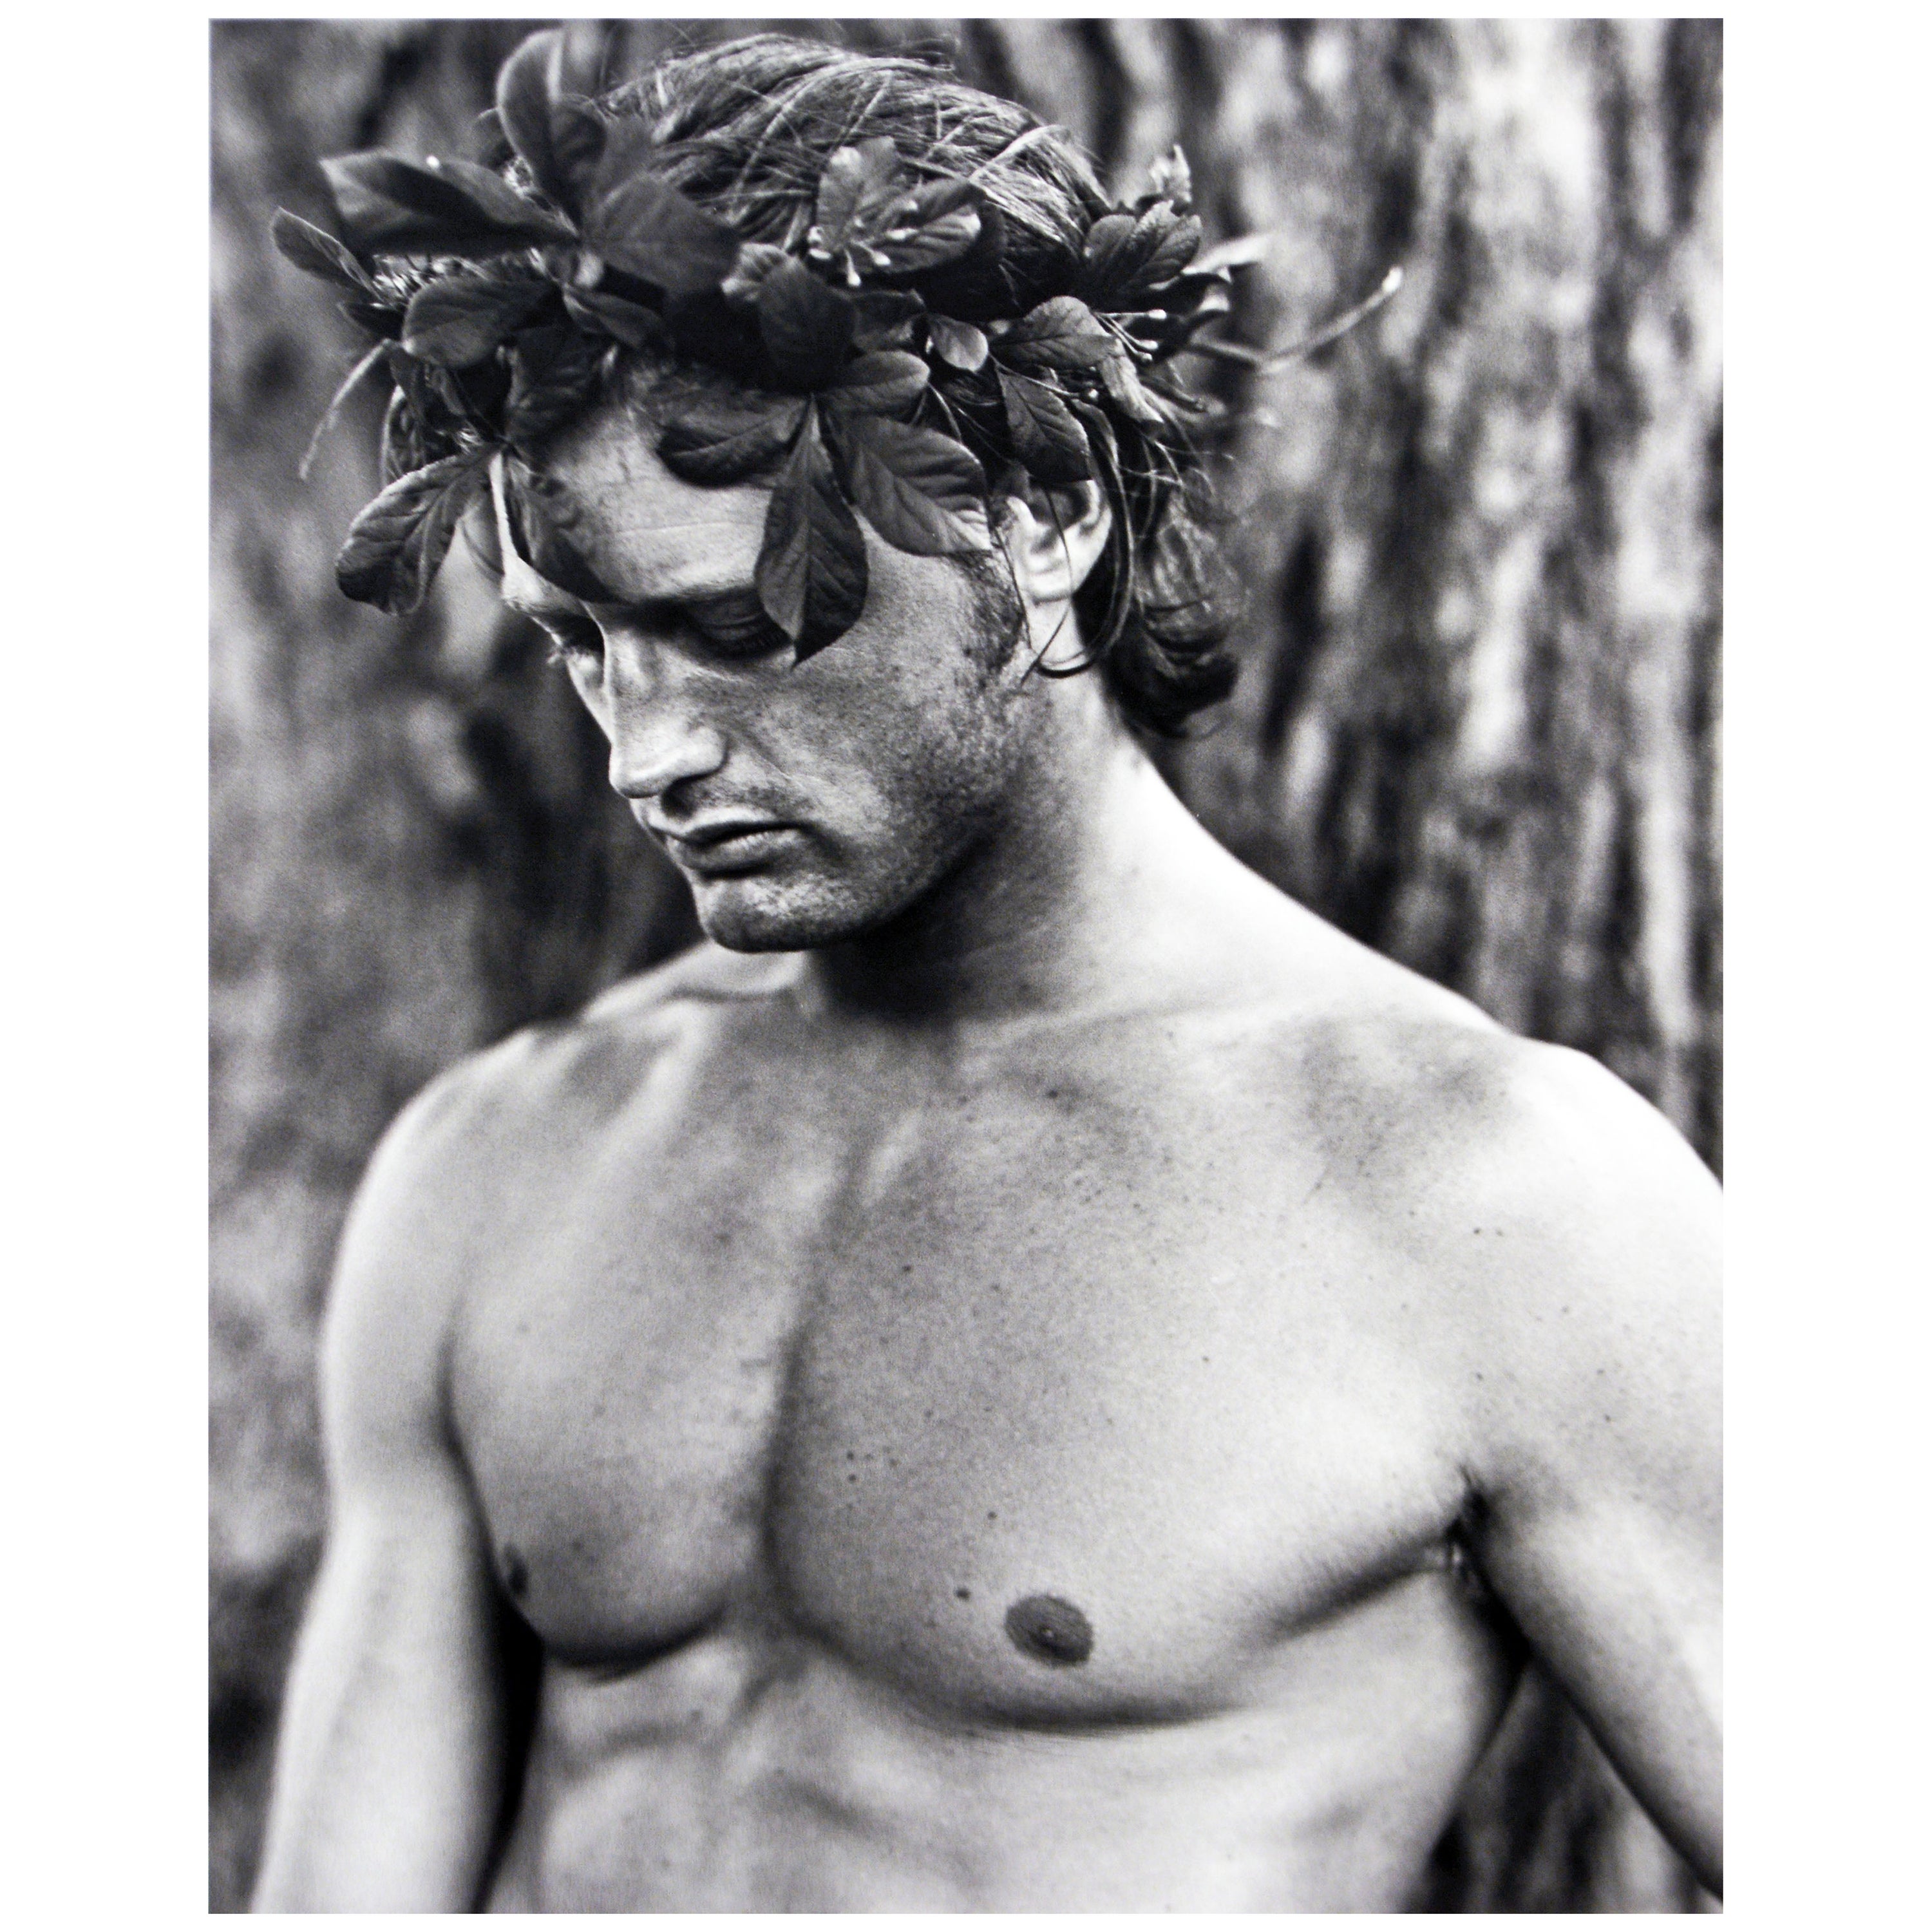 Signed Work by 'Provocateur photographer Kenneth Rothman Zane 'A Modern Bacchus'